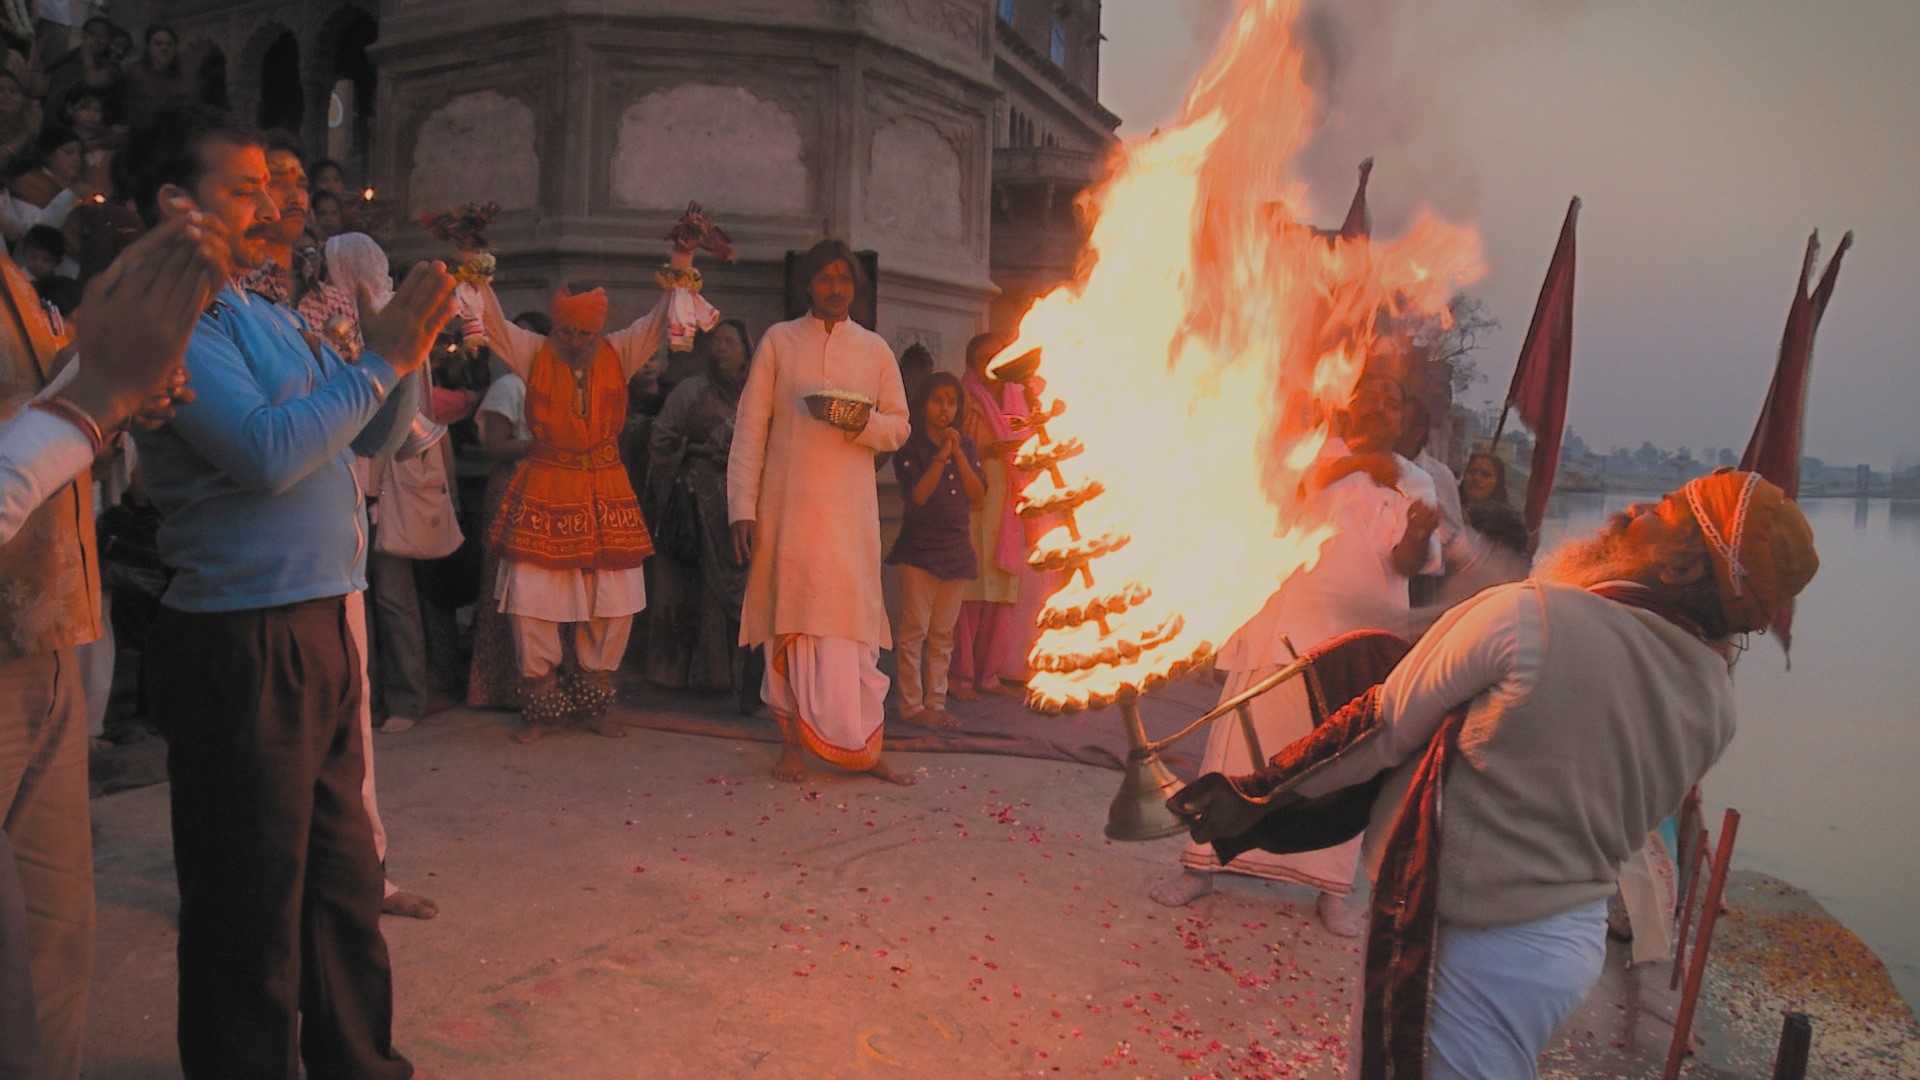 Marvel at an ancient fire ceremony. Yamuna arati, a daily worshiping of the sacred river. Keshi Ghat, Vrindavan, India. A still from the multi-award winning film 'Reconnection'.